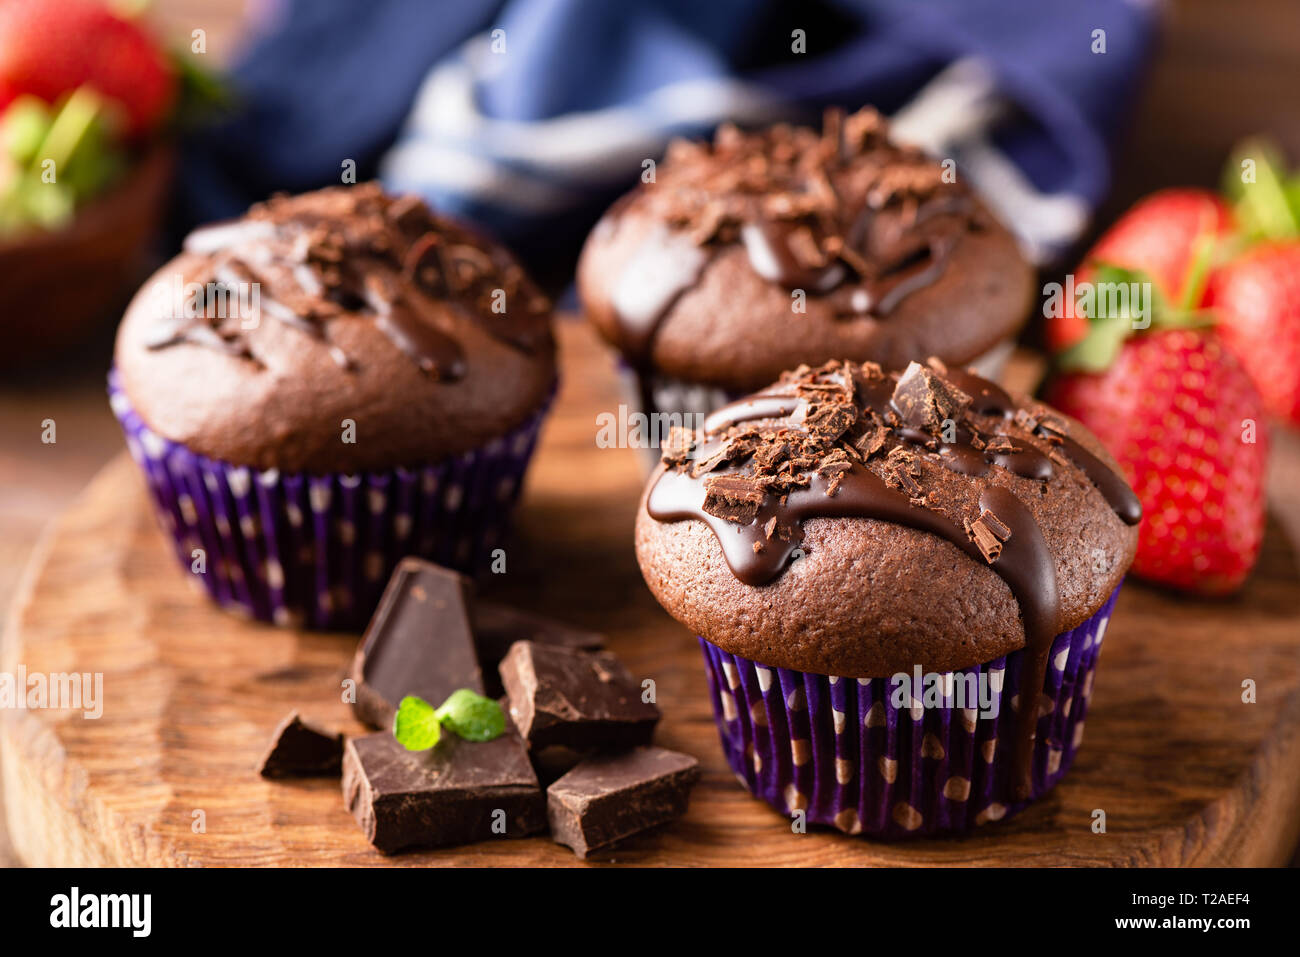 Tasty chocolate muffins glazed with chocolate ganache on a wooden serving board. Closeup view Stock Photo